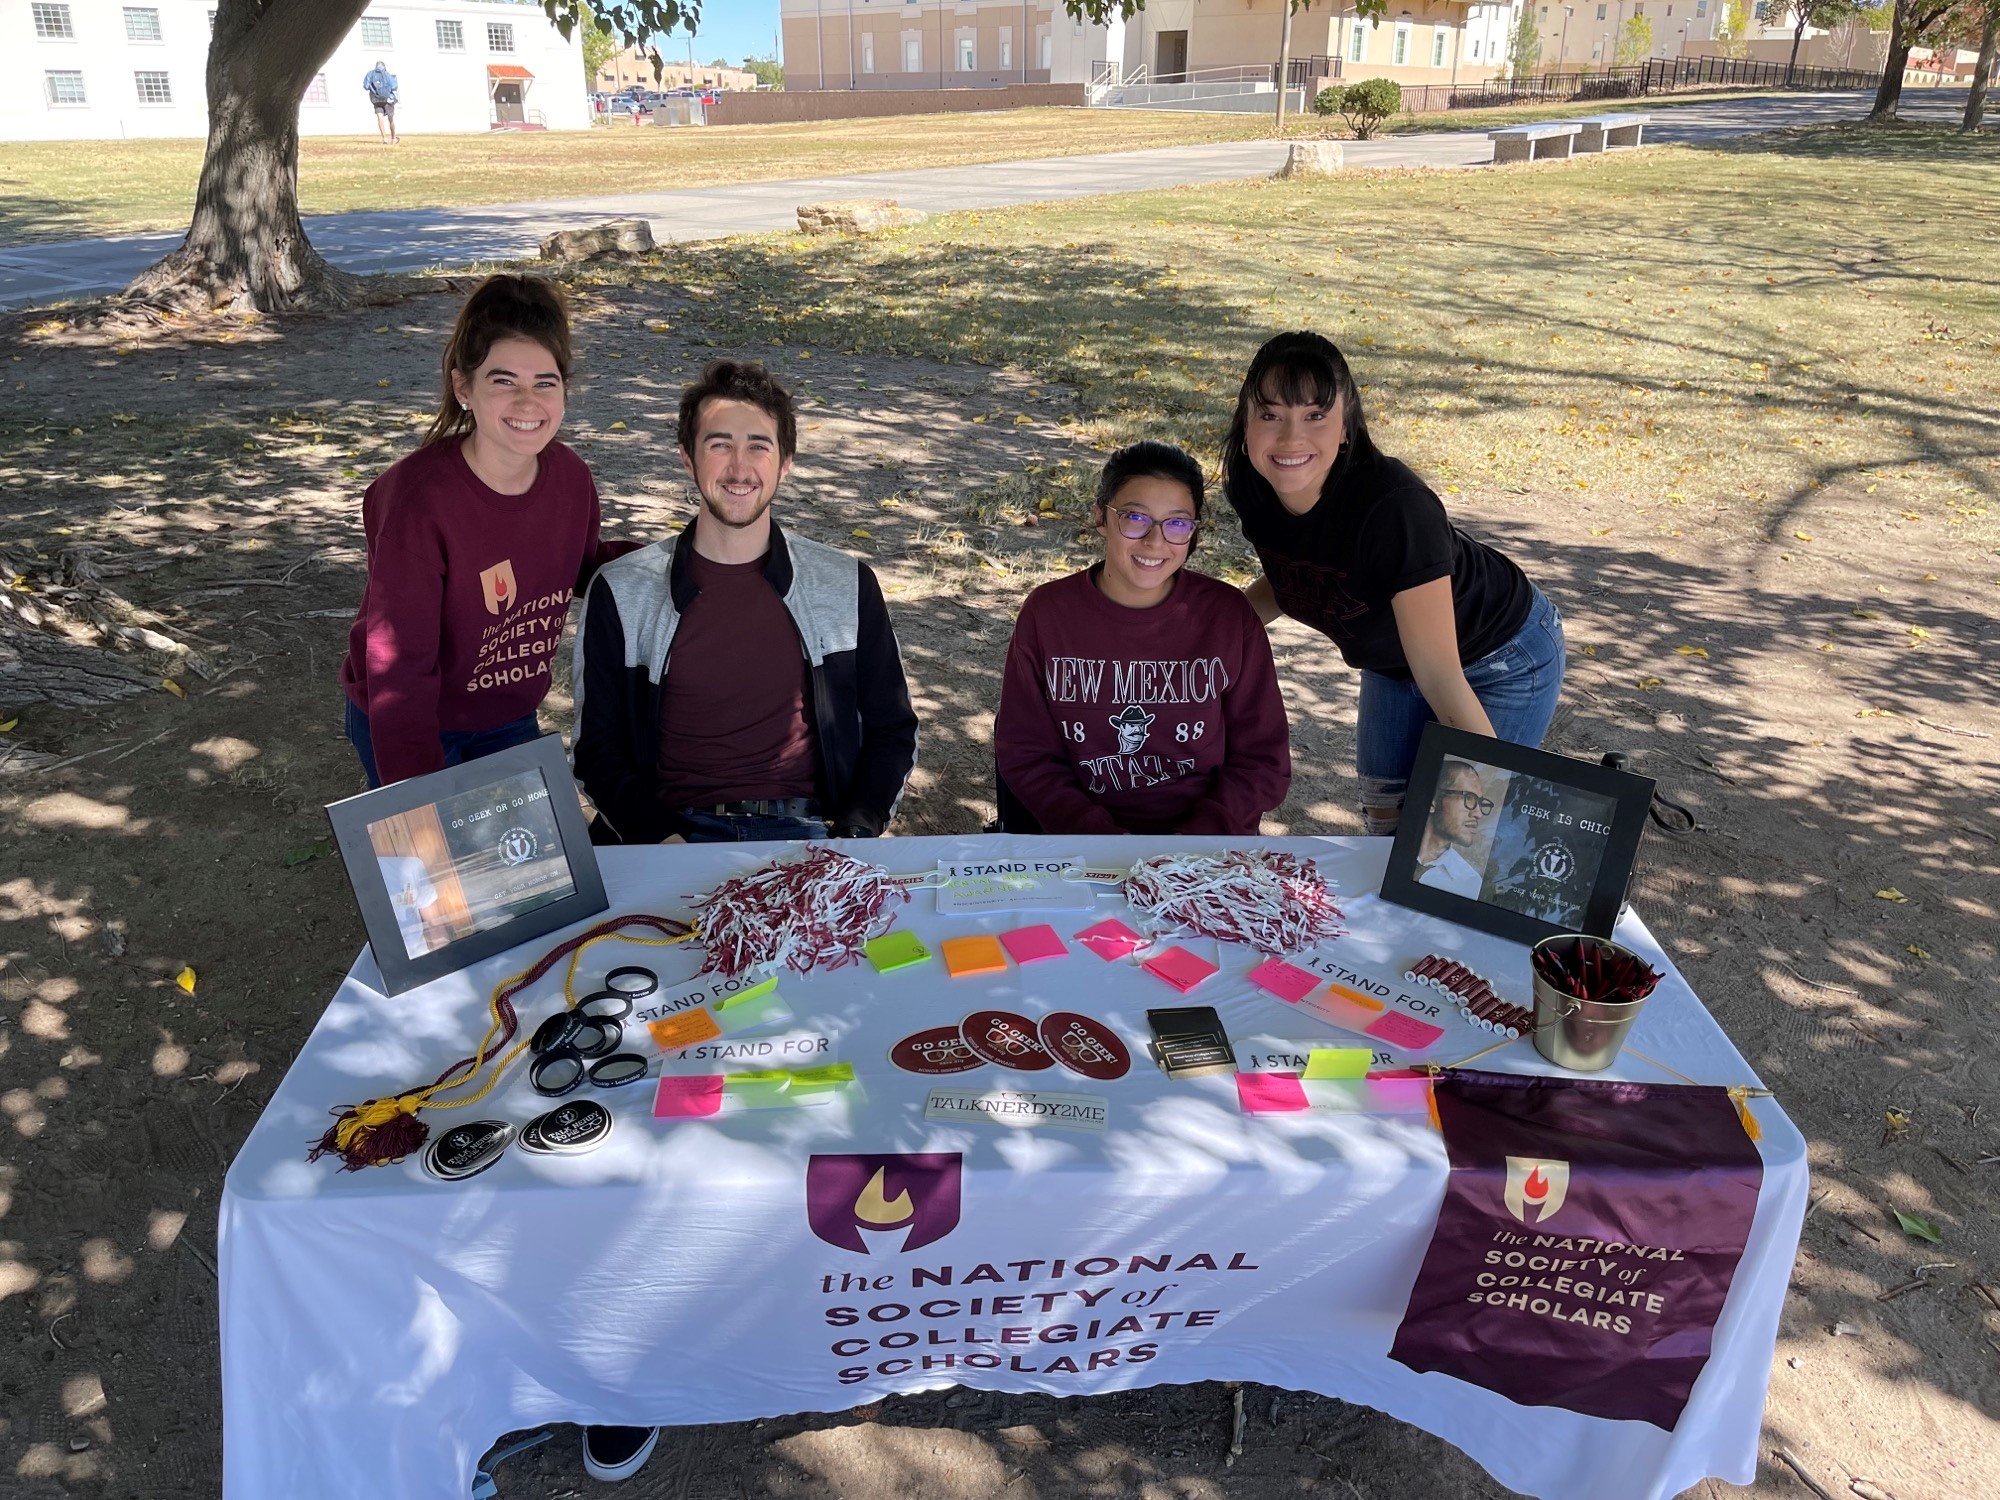 New Mexico State University Table